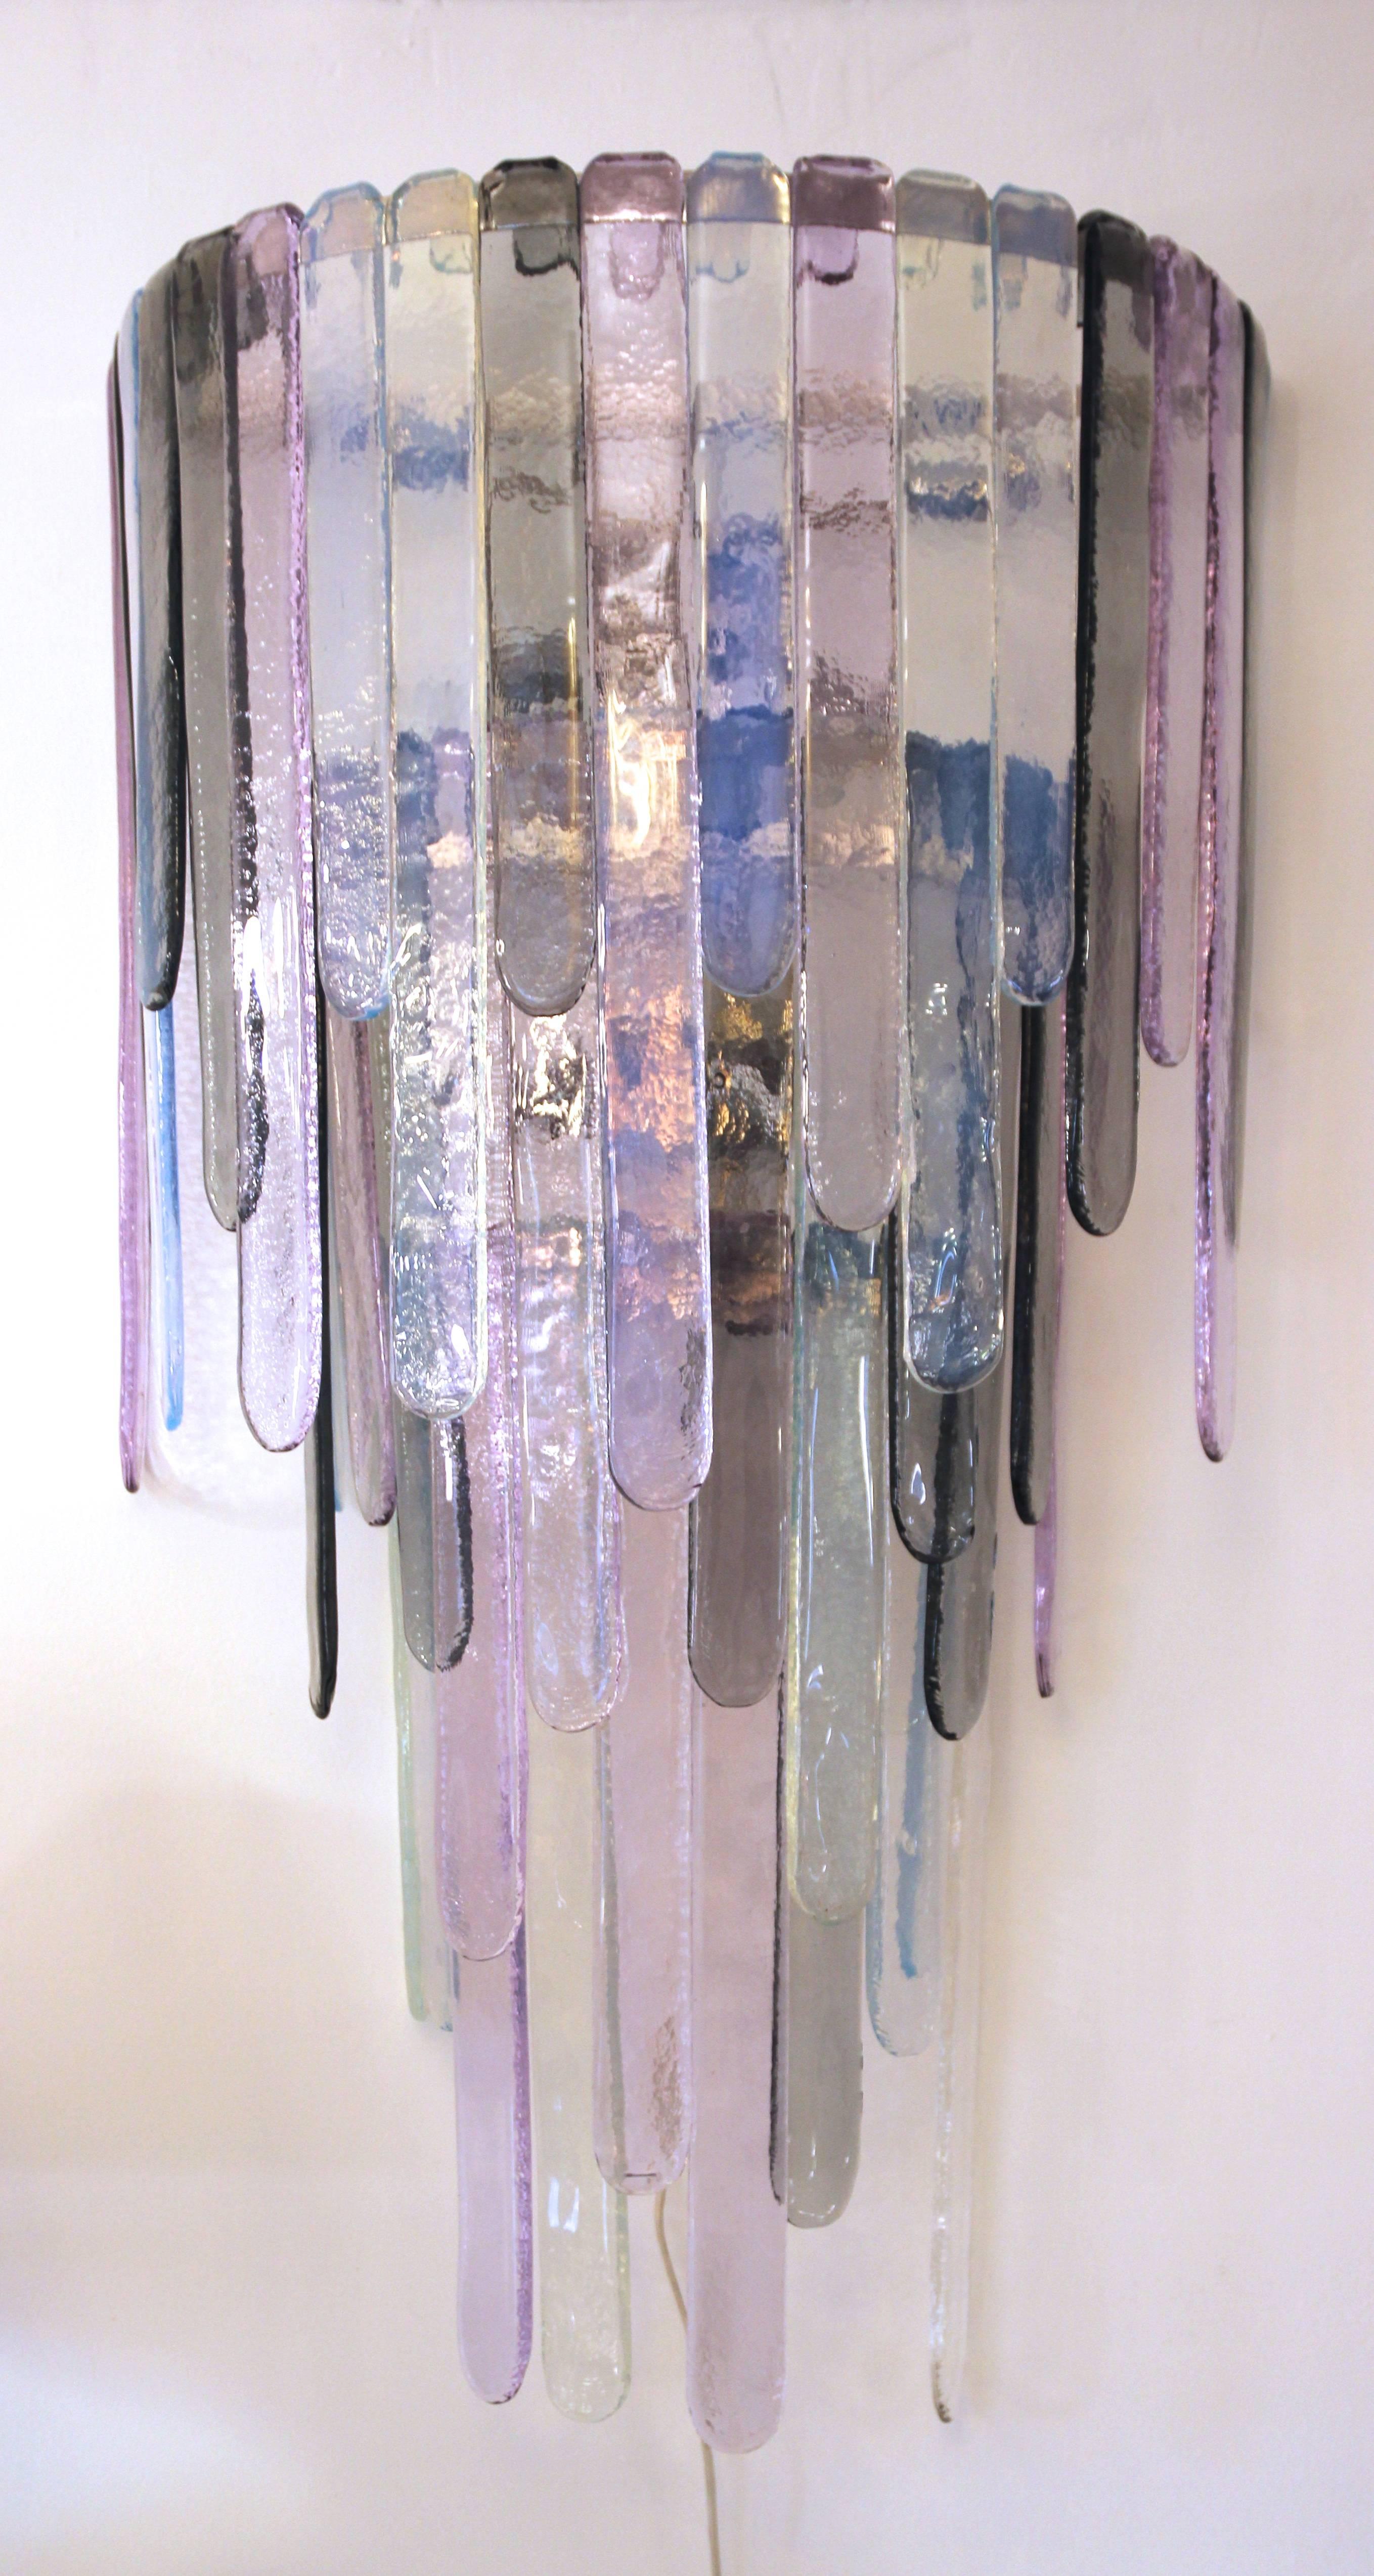 Pair of Murano glass sconces in the style of Leucos,
Chromed steel and glass,
Decorated with pendants in iridescent tones,
circa 2000, Italy.

Measures: Height: 1 m, width 50 cm, depth: 30 cm.